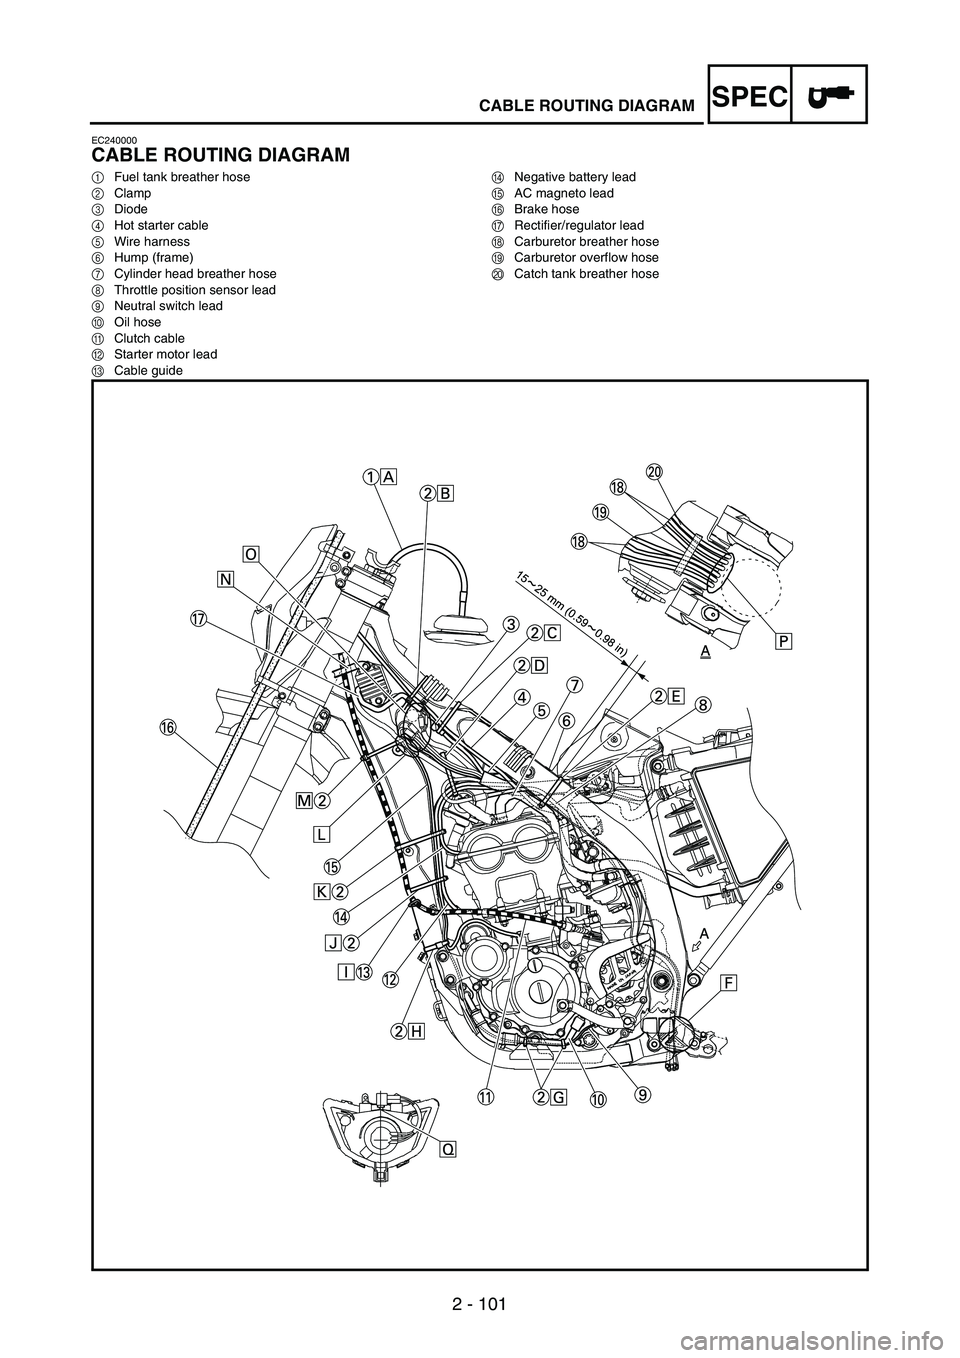 YAMAHA WR 250F 2007  Manuale duso (in Italian) 2 - 101
SPECCABLE ROUTING DIAGRAM
EC240000
CABLE ROUTING DIAGRAM
1Fuel tank breather hose
2Clamp
3Diode
4Hot starter cable
5Wire harness
6Hump (frame)
7Cylinder head breather hose
8Throttle position s